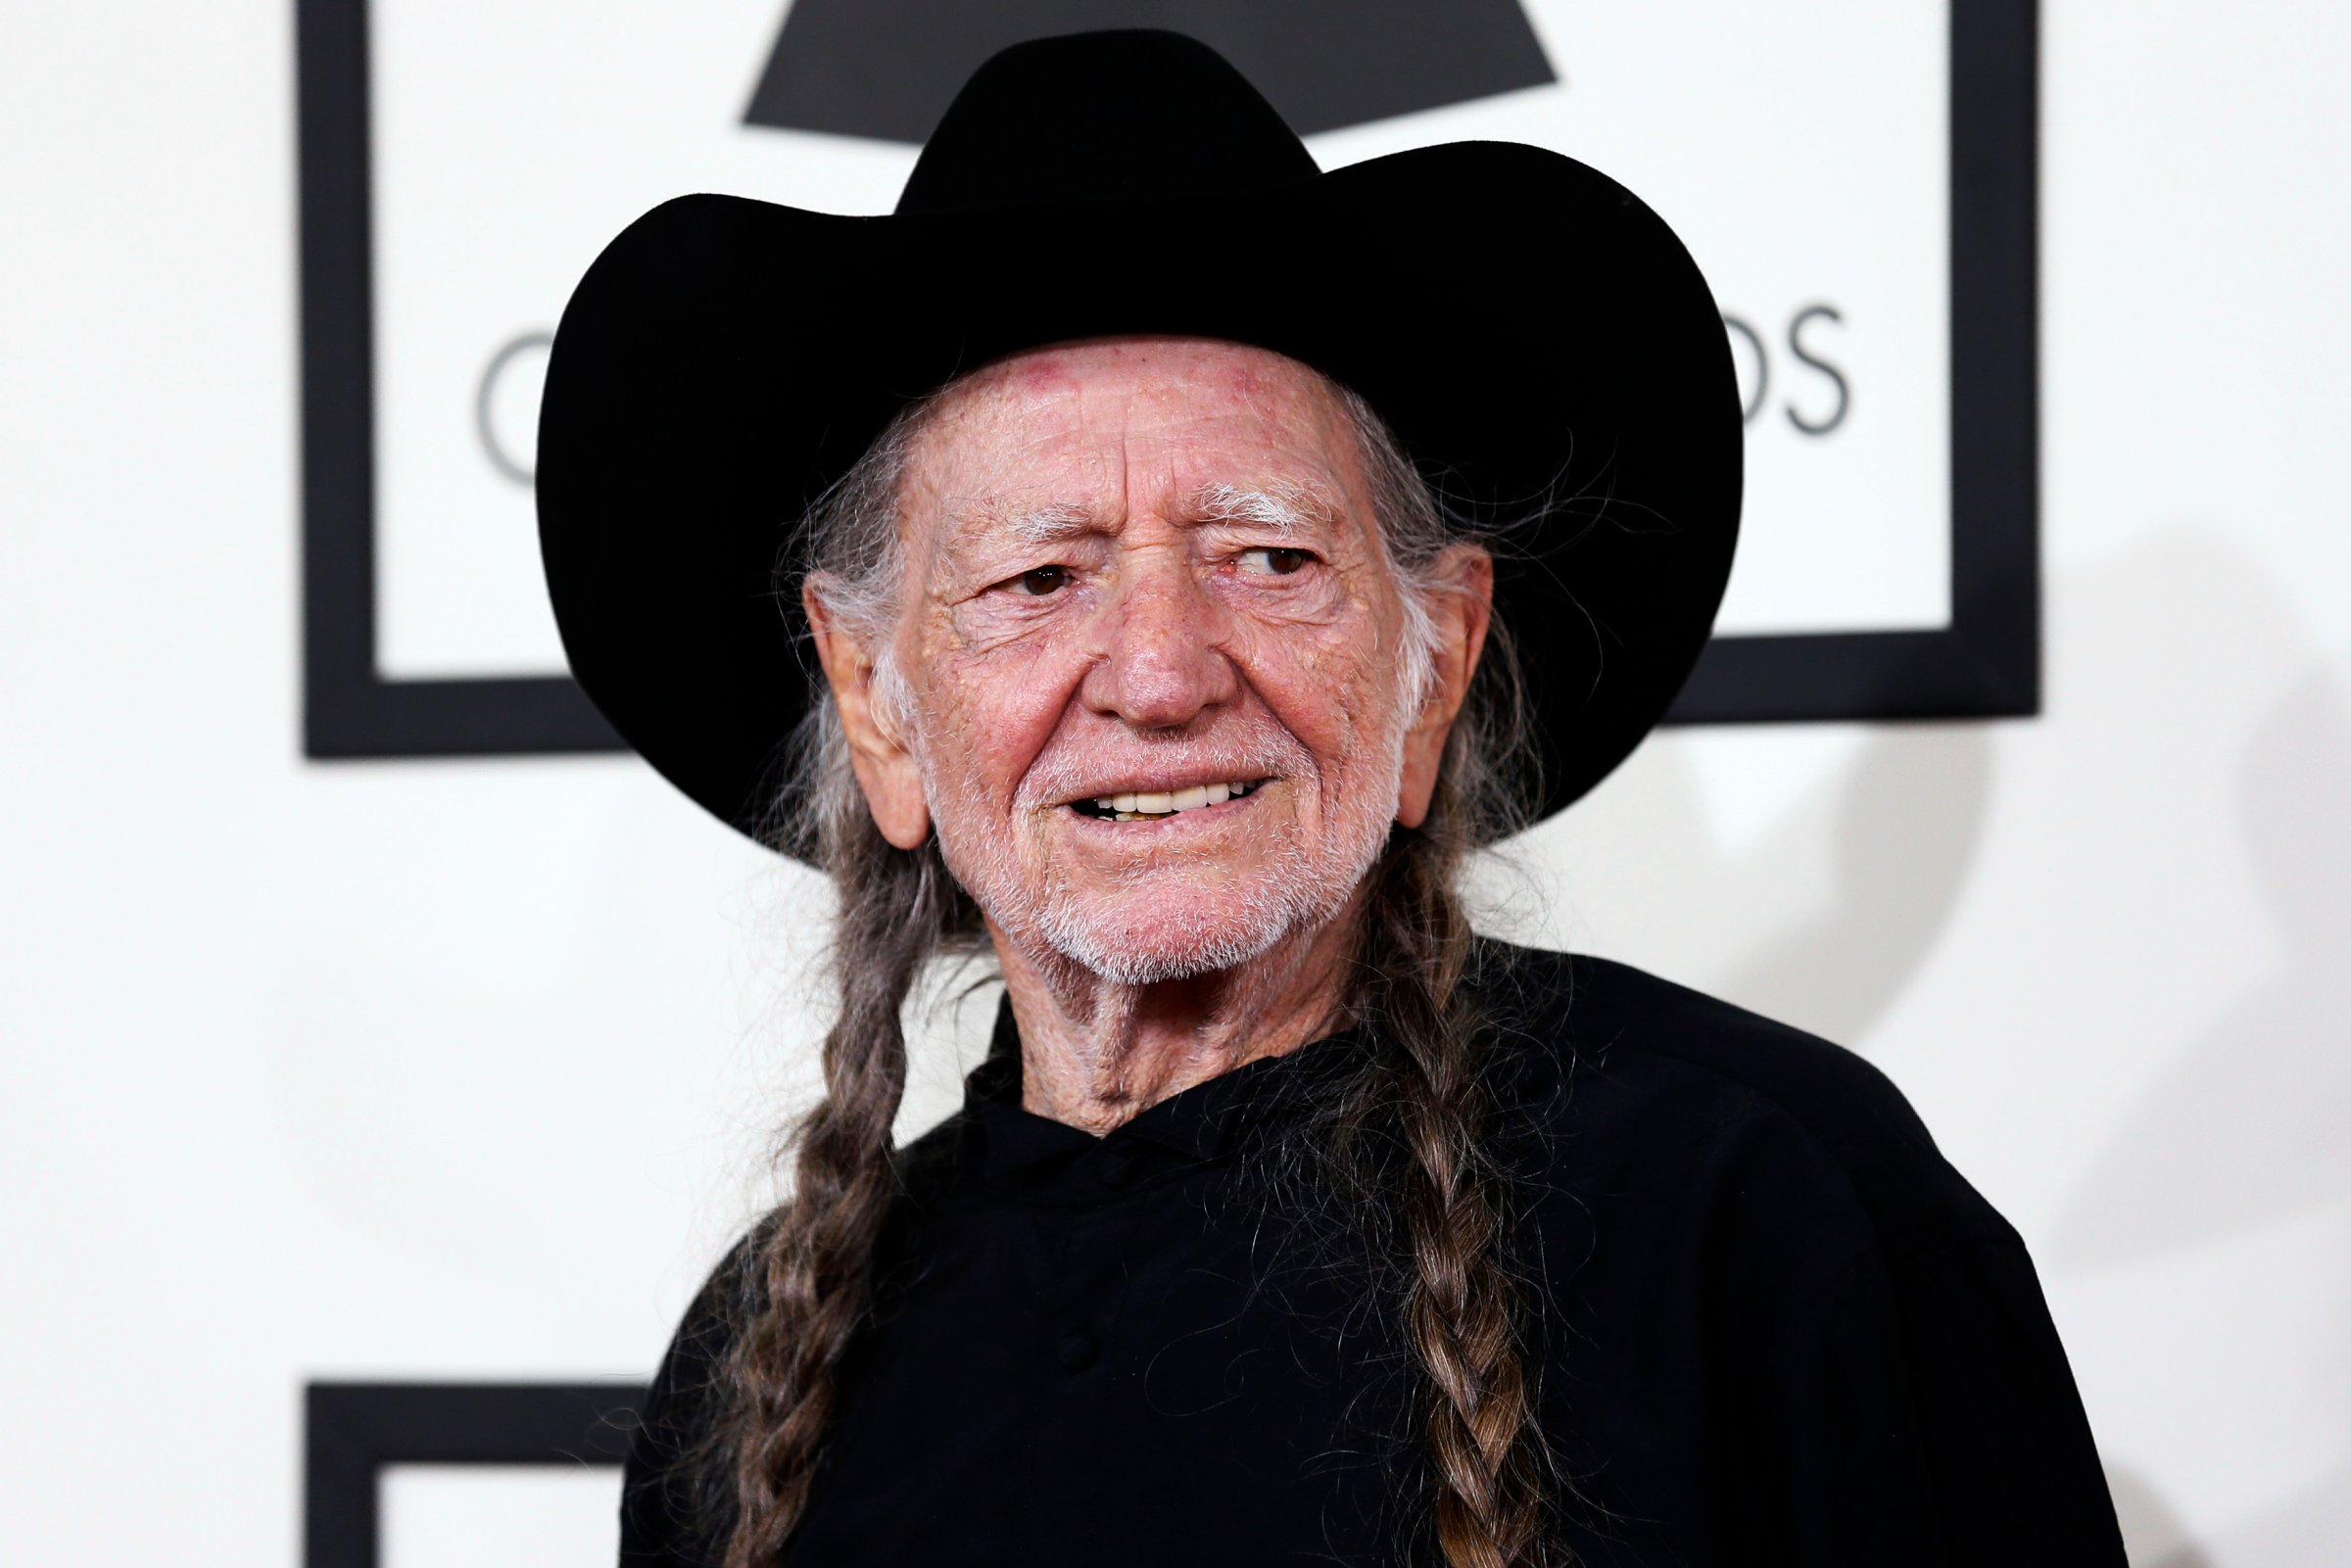 Musician Willie Nelson arrives at the 56th annual Grammy Awards in Los Angeles